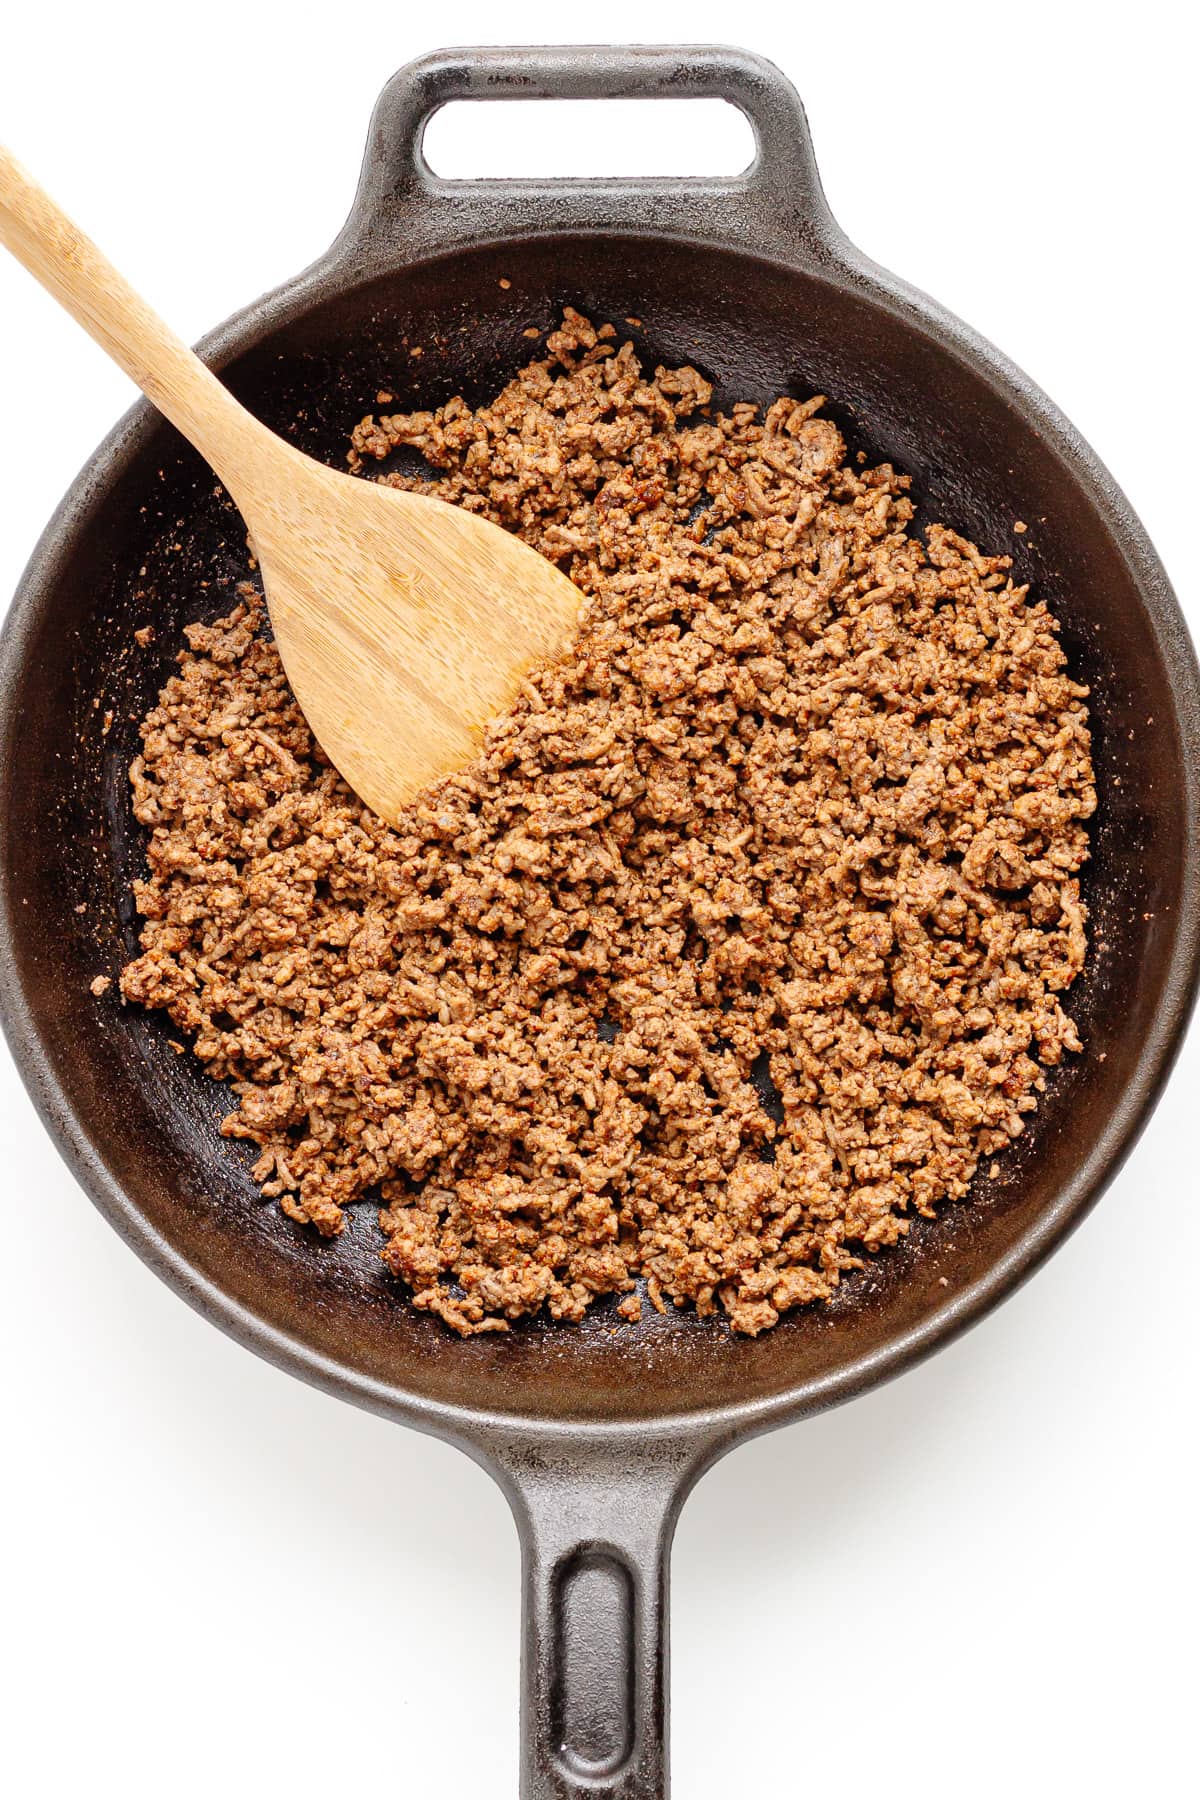 Browned ground beef seasoned with fajita seasoning in a cast iron skillet with wooden spoon.